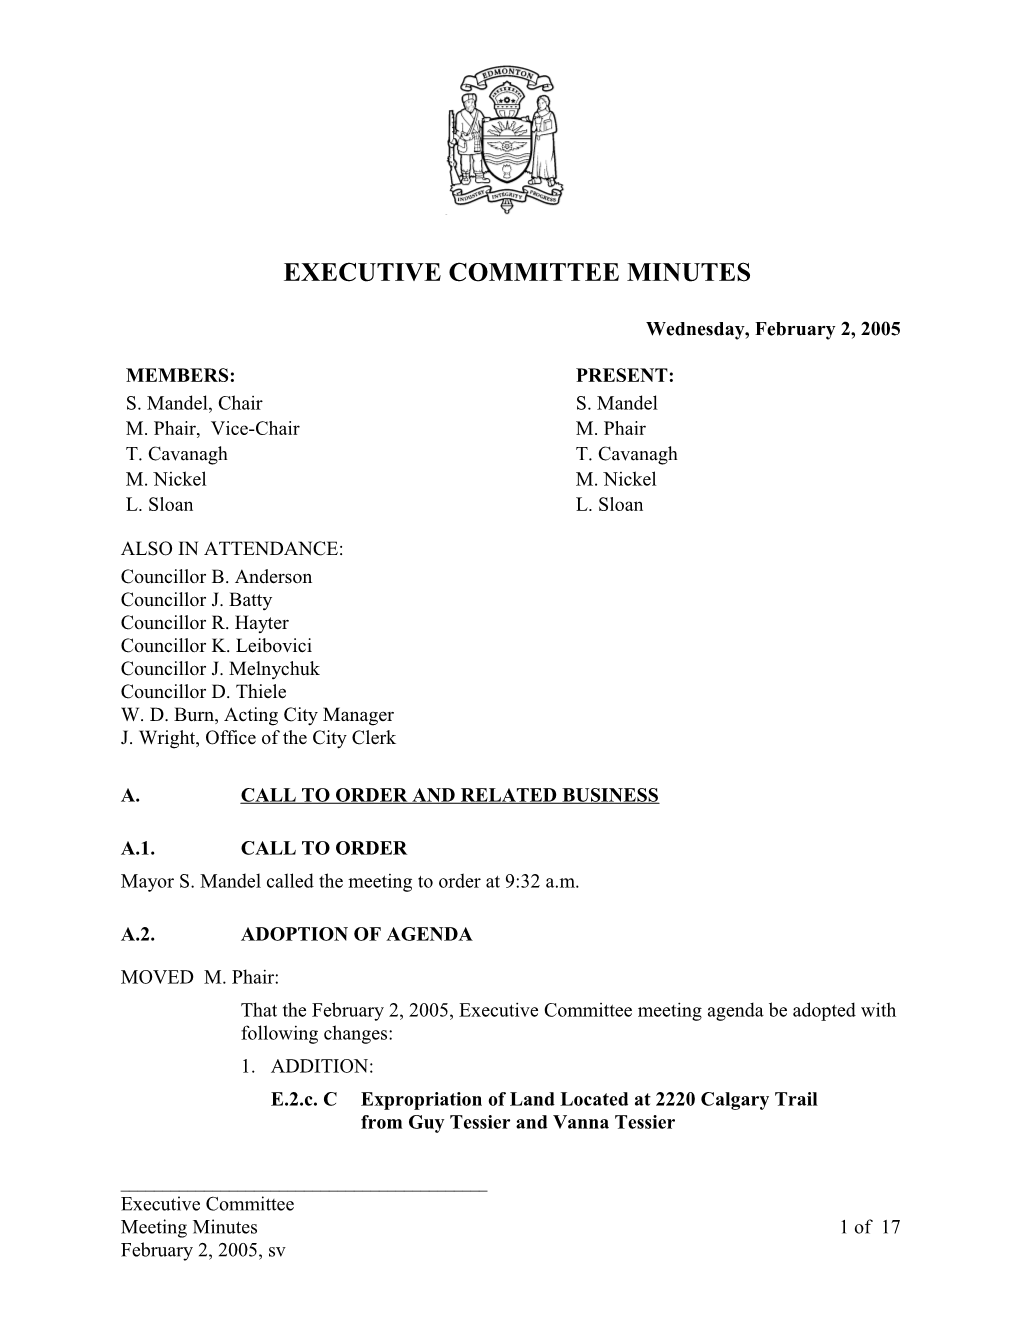 Minutes for Executive Committee February 2, 2005 Meeting